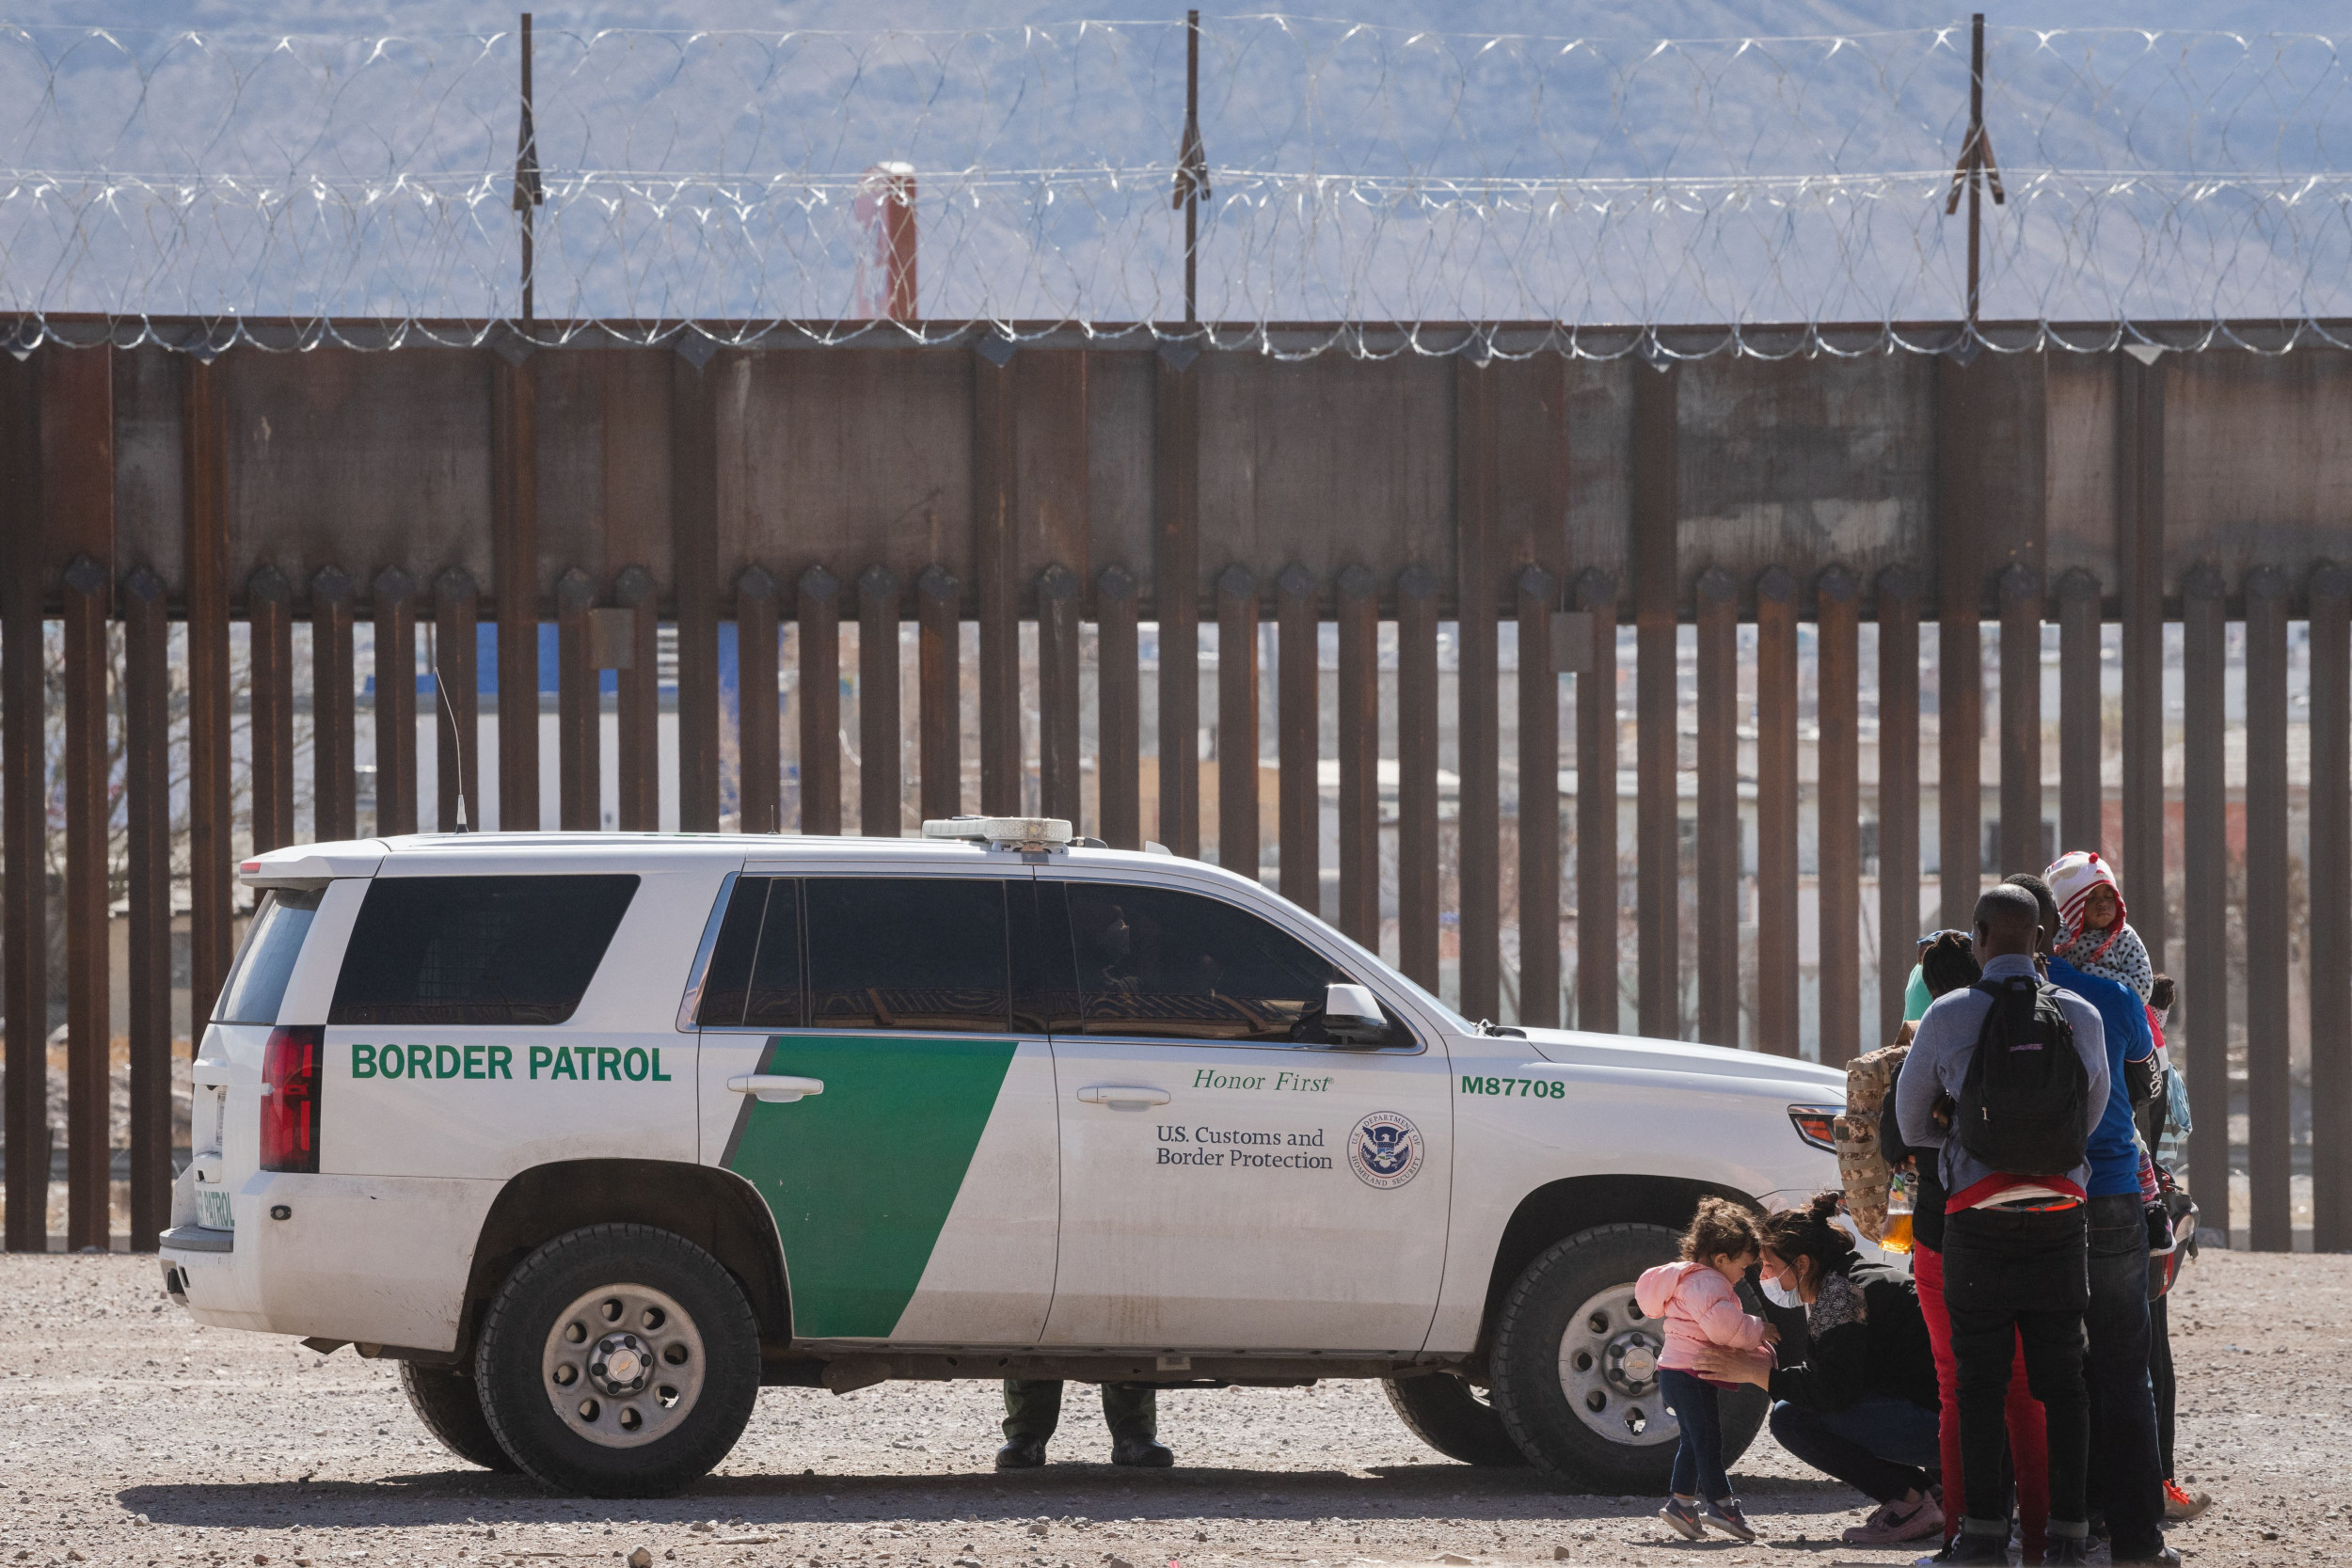 Mexico sign warns U.S. Border Patrol agents "bullets can cross the riv...